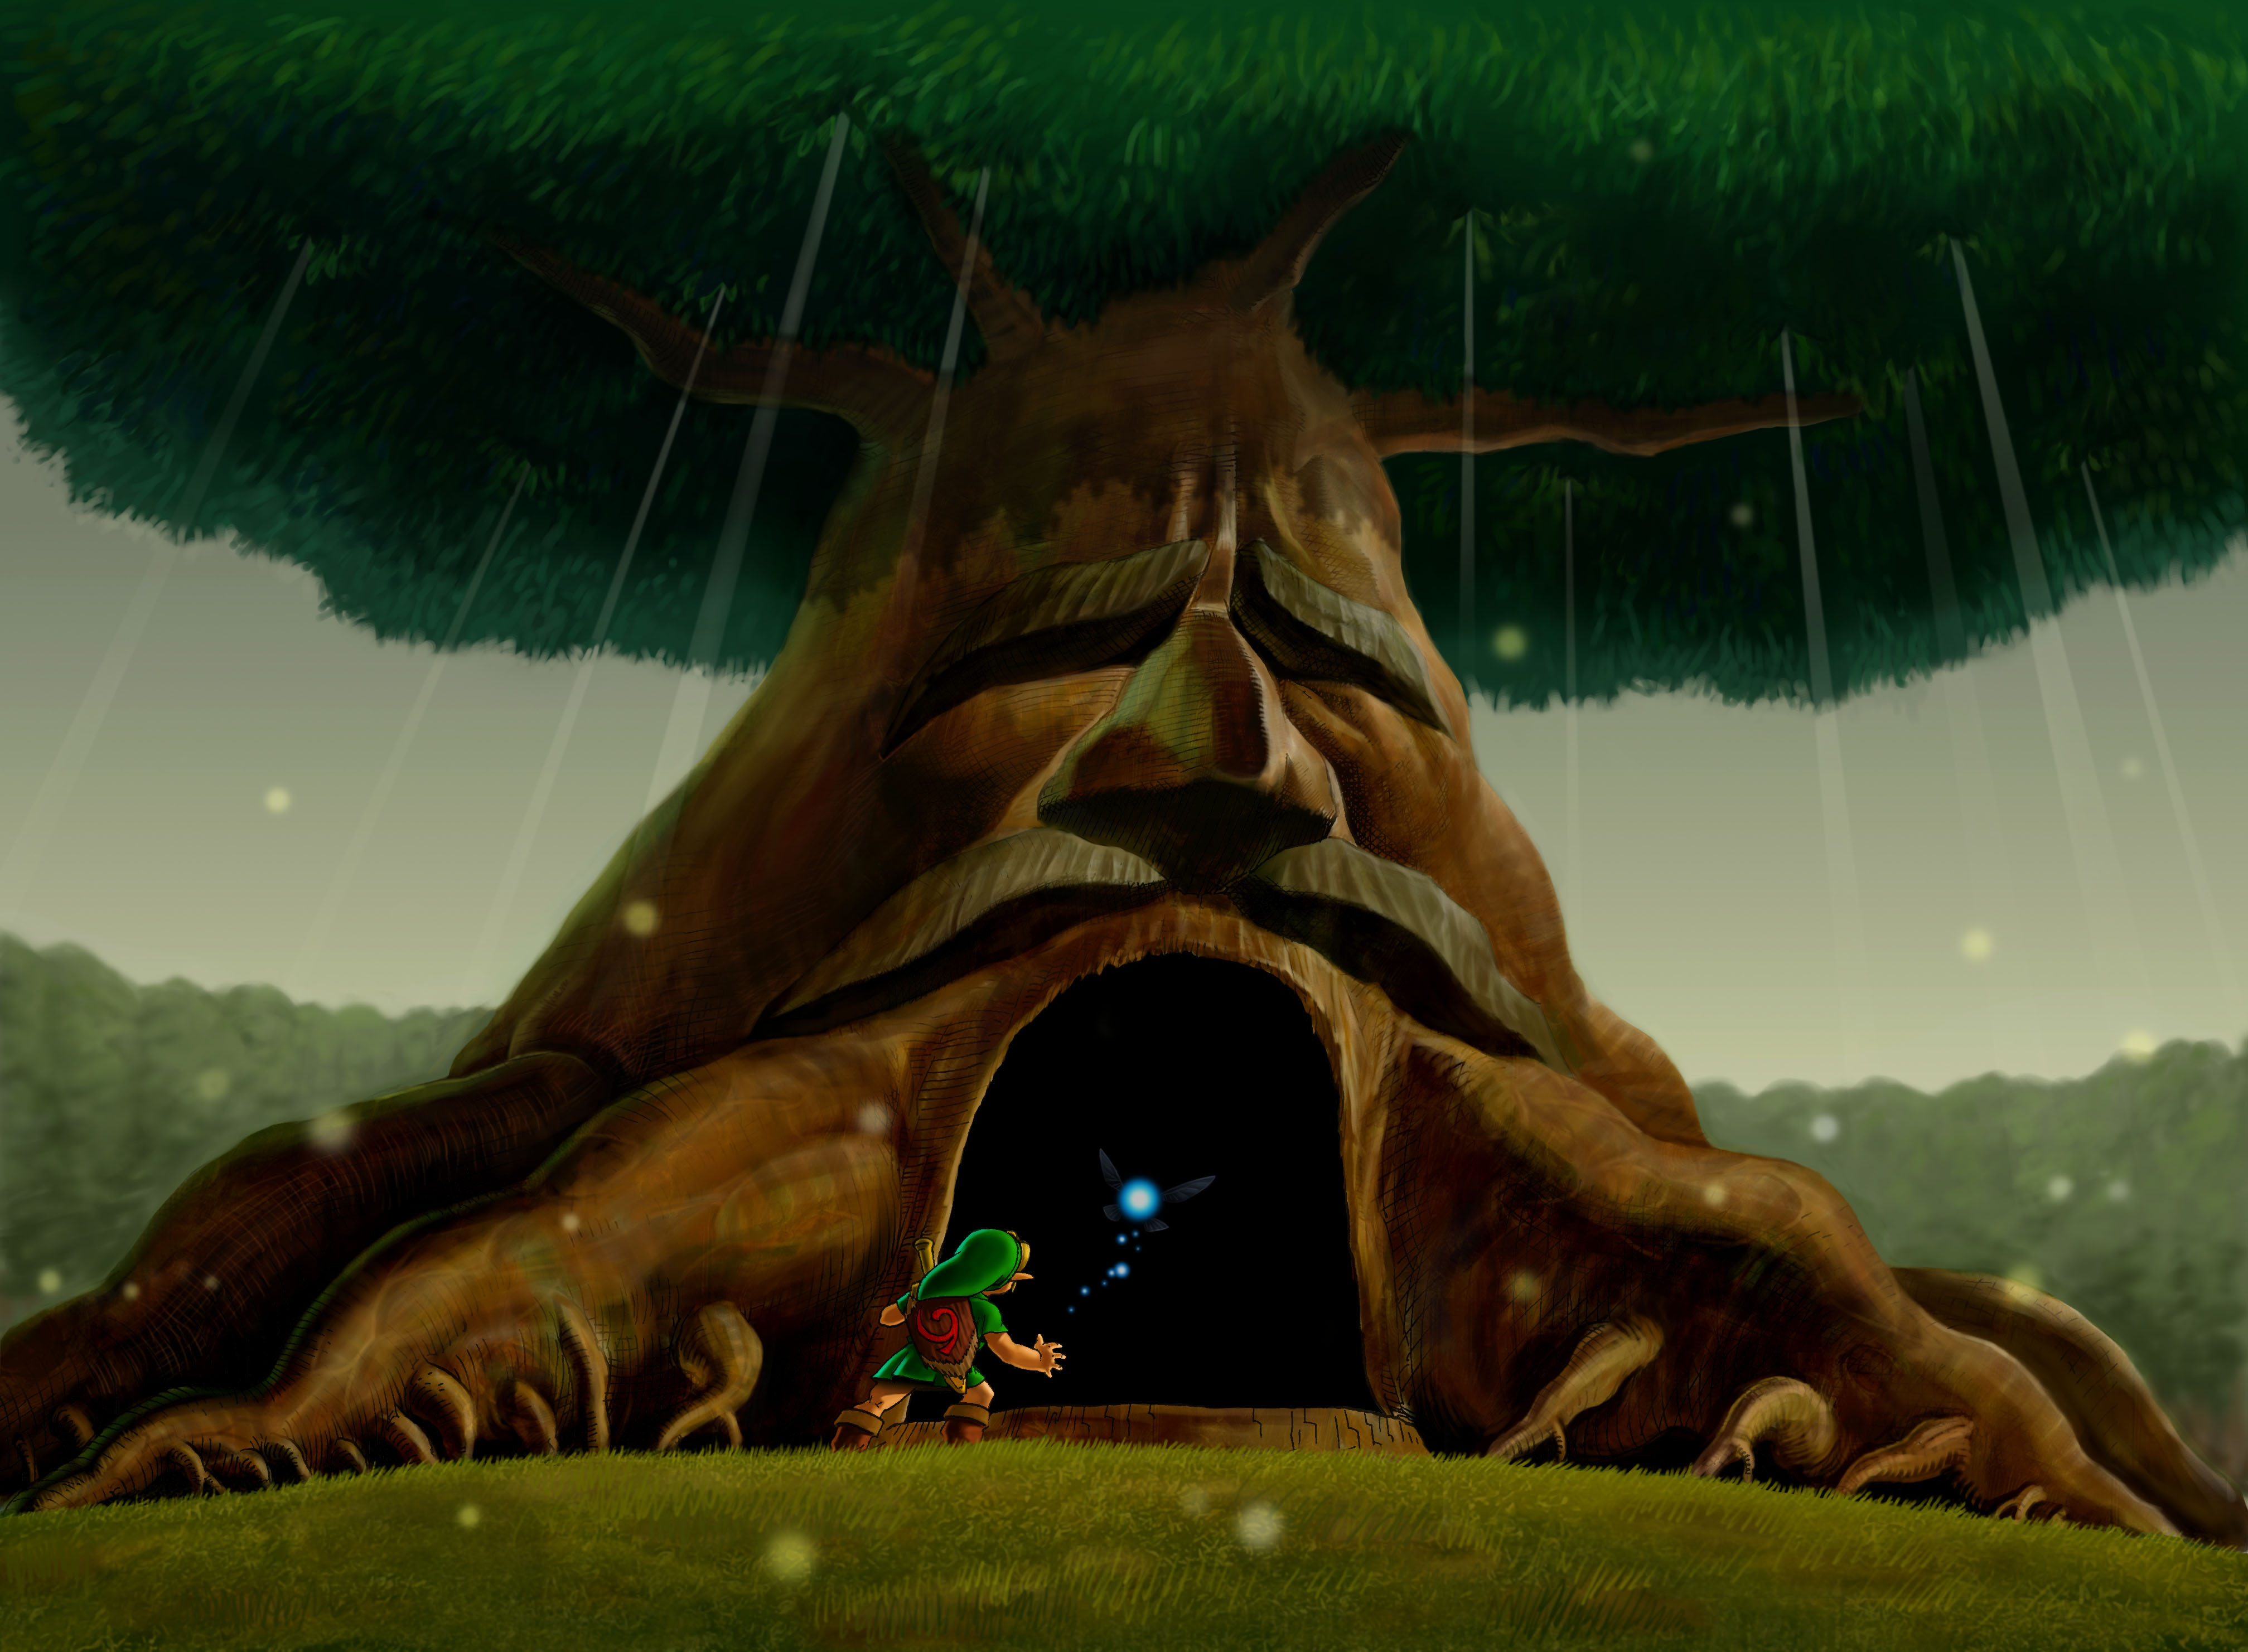 Zelda: The Sealed Palace is a full Ocarina of Time sequel